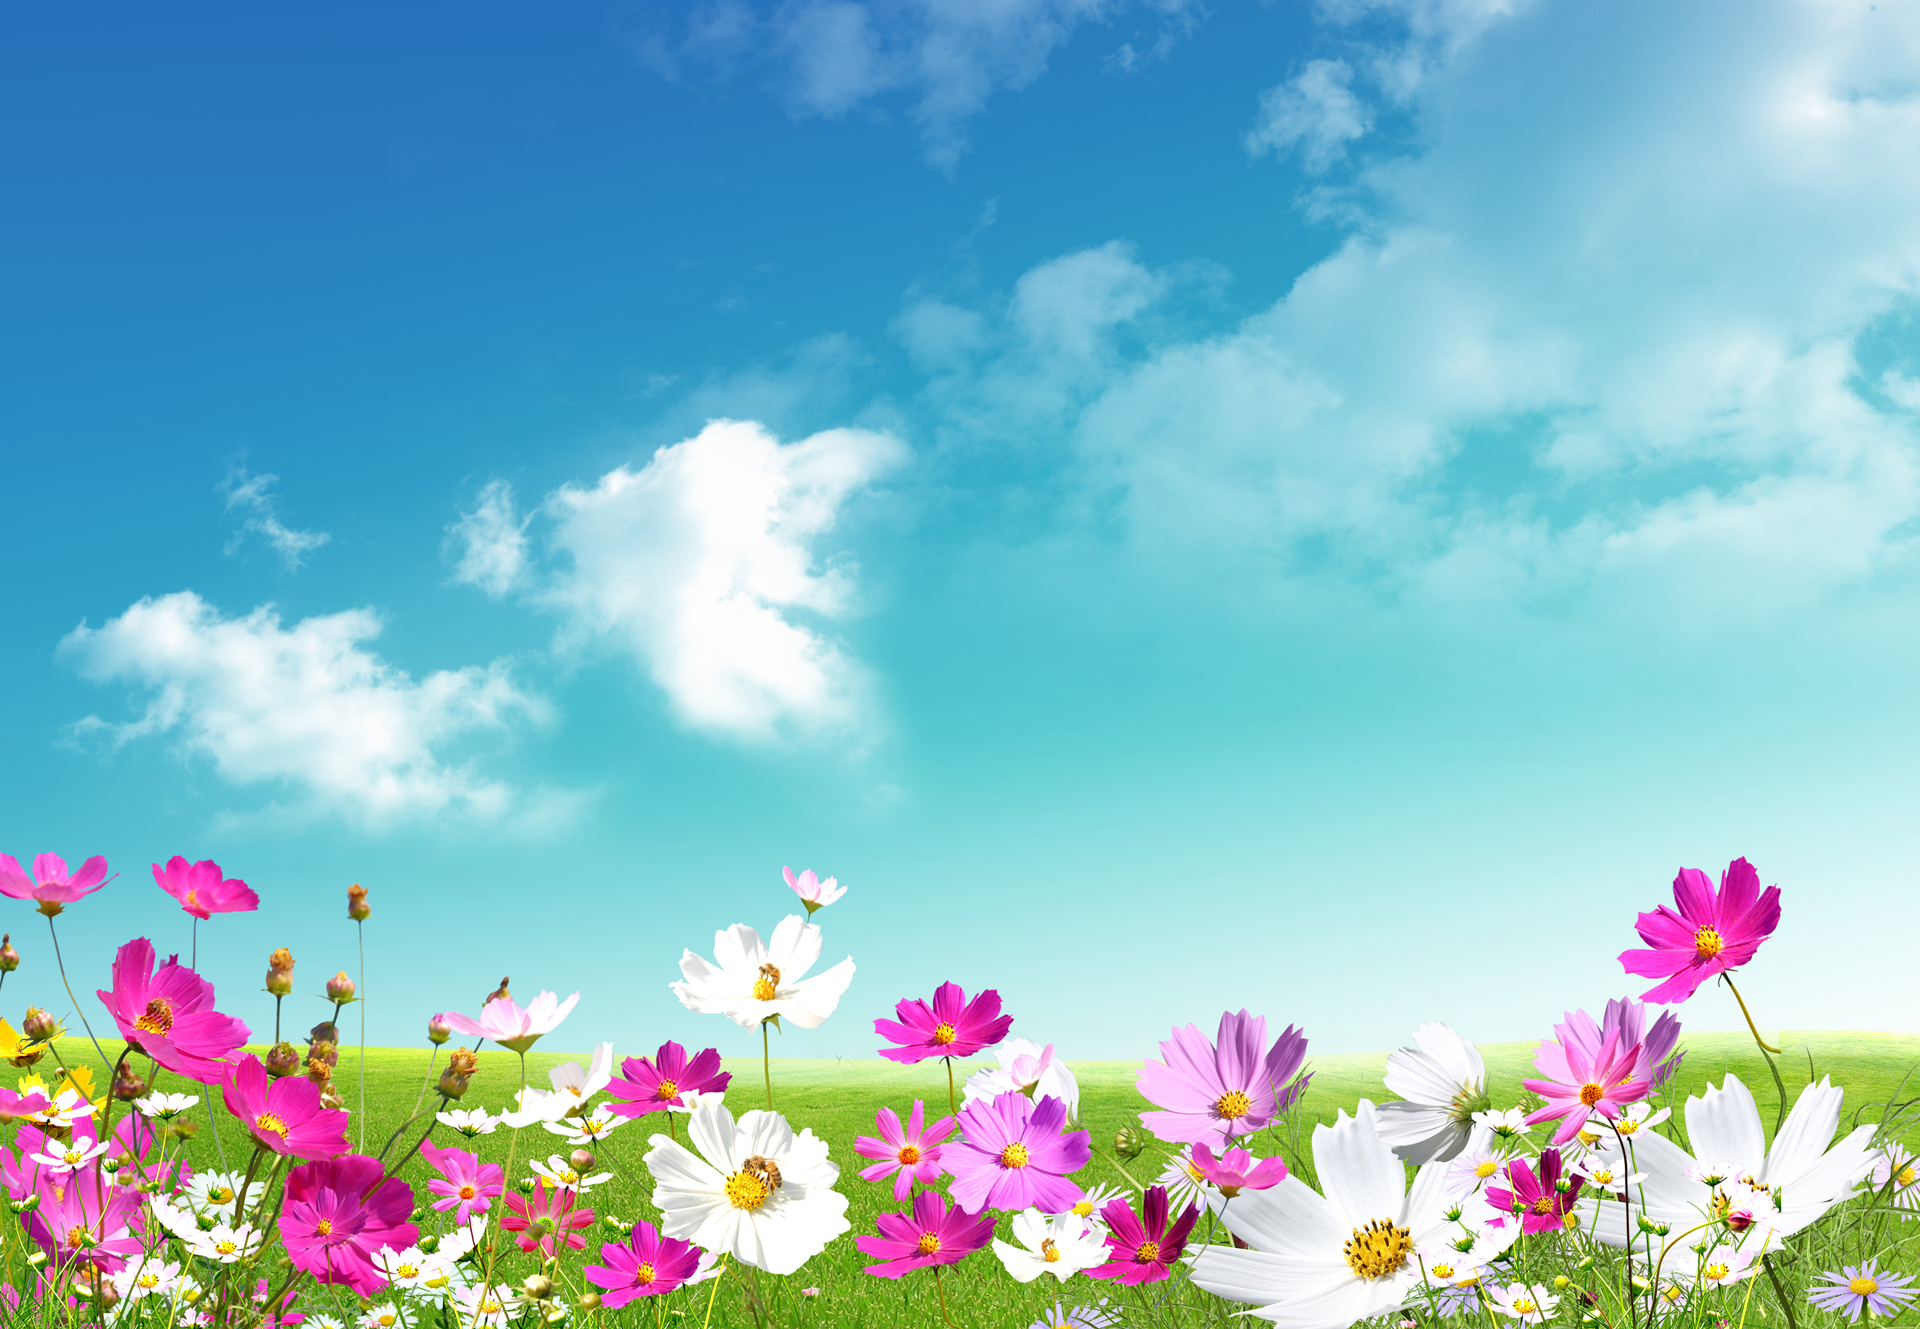 Spring Wallpaper 4x Background For Puter